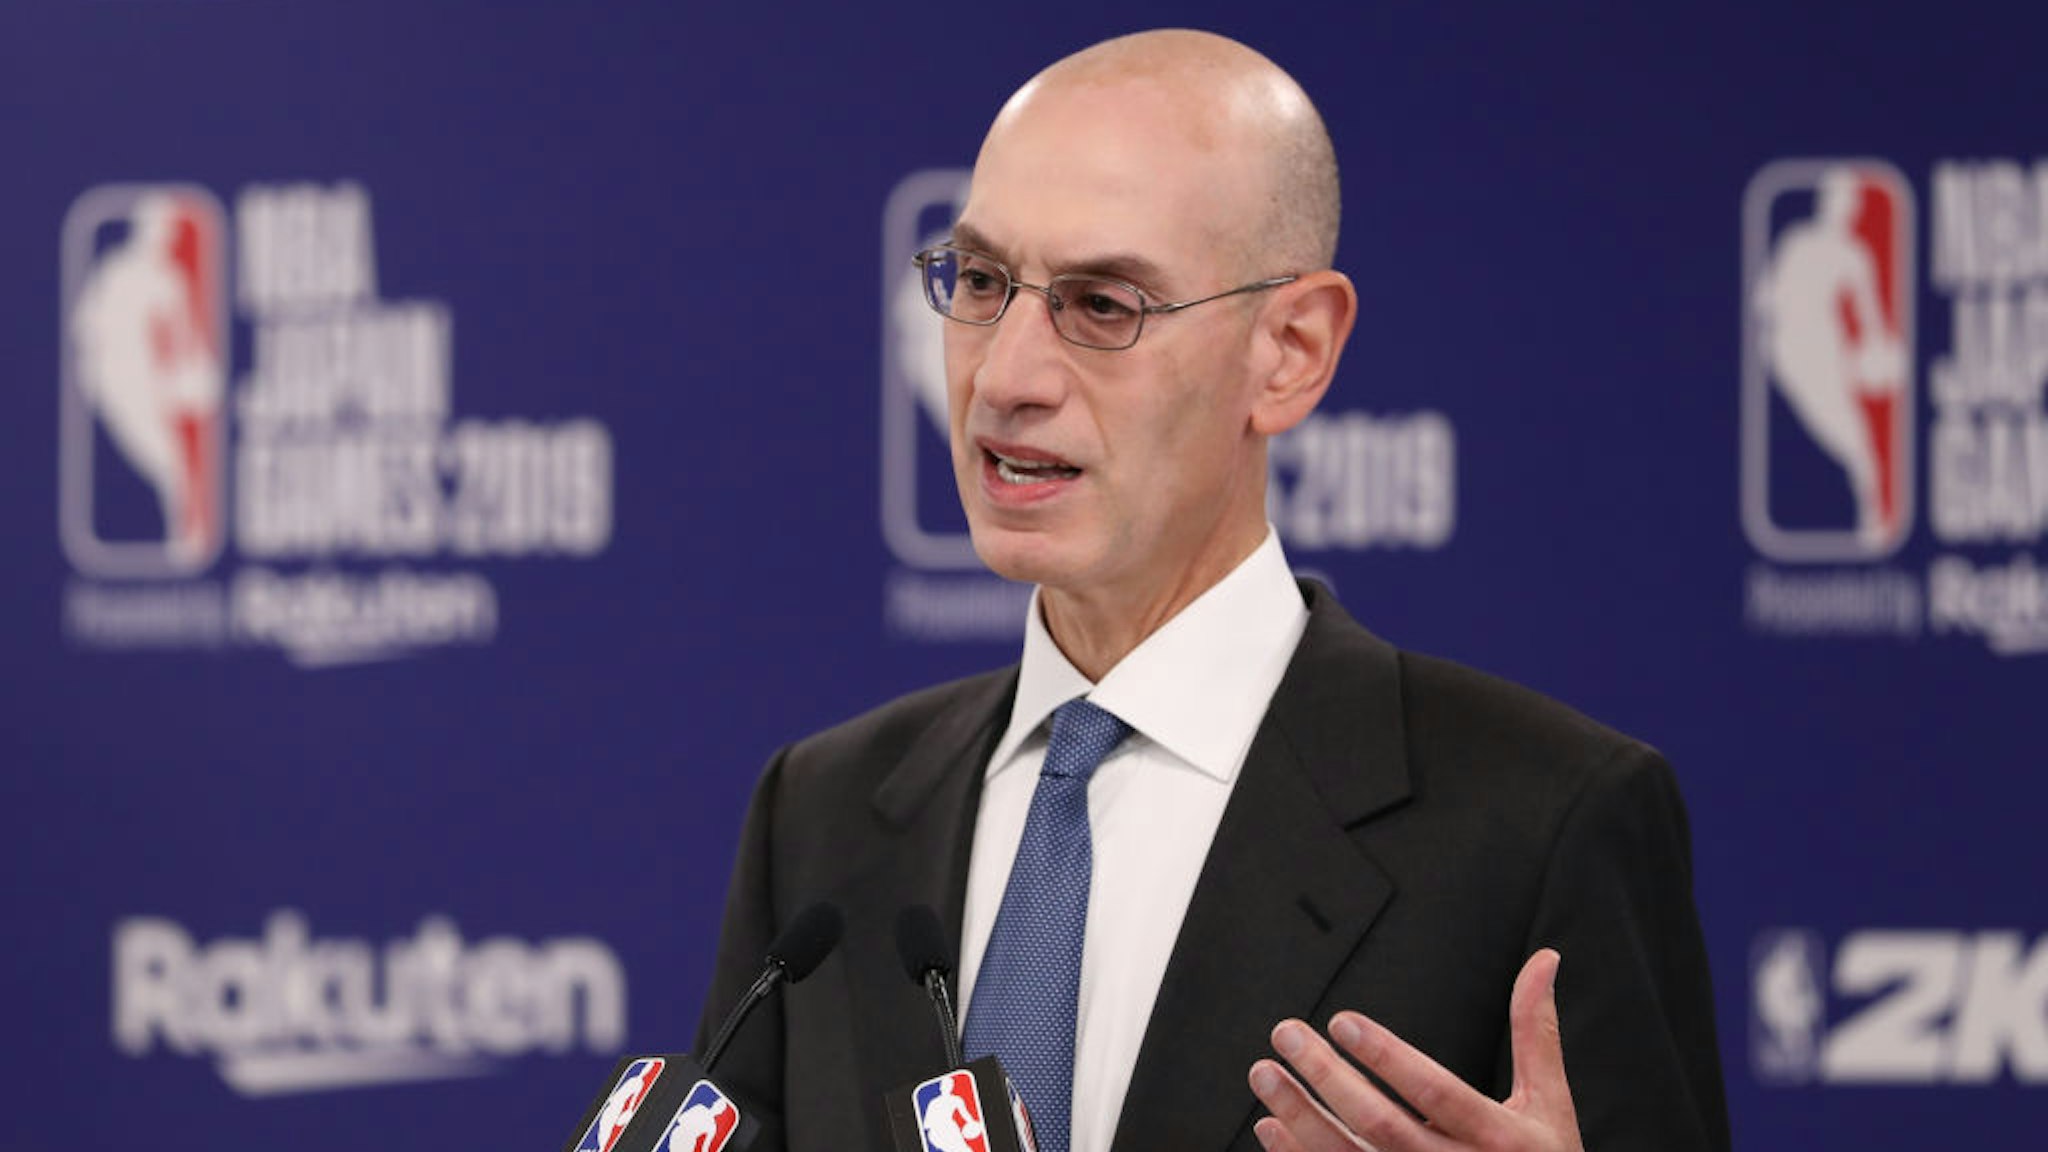 Commissioner of the National Basketball Association (NBA) Adam Silver speaks during a press conference prior to the preseason game between Houston Rockets and Toronto Raptors at Saitama Super Arena on October 08, 2019 in Saitama, Japan. (Photo by Takashi Aoyama/Getty Images)